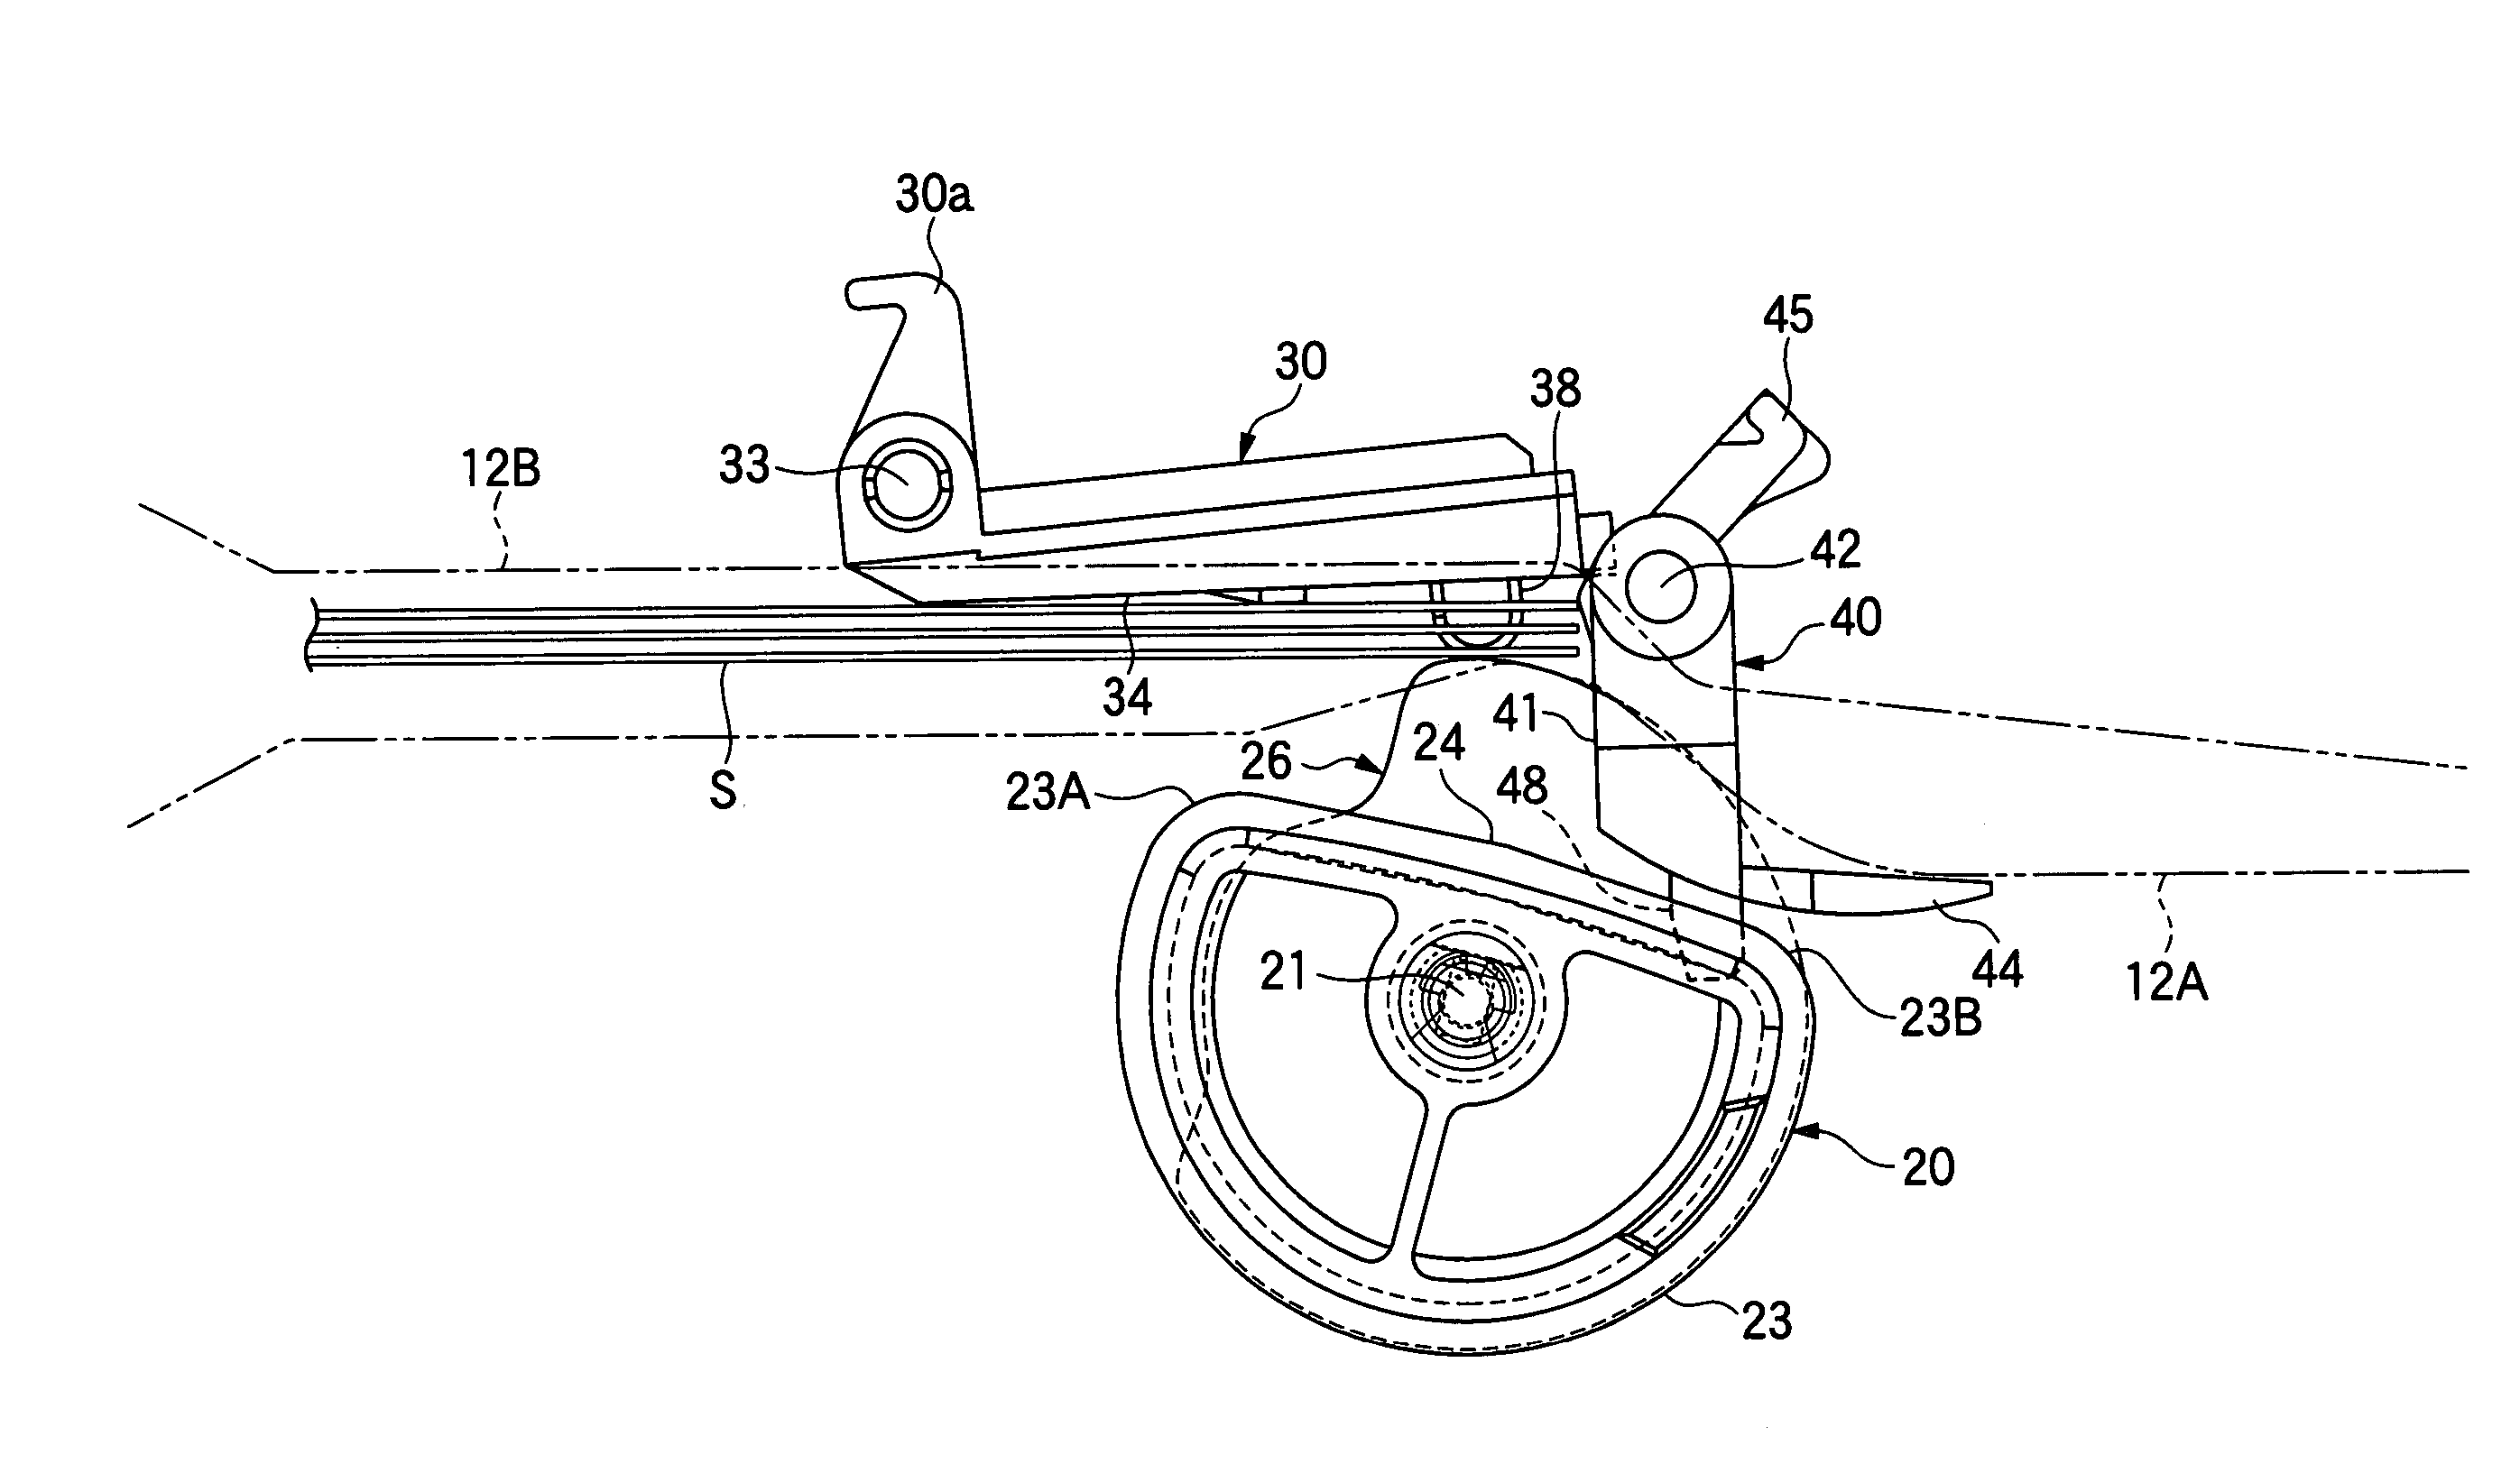 Sheet feeding device with variable faced roller and integrated sheet guides